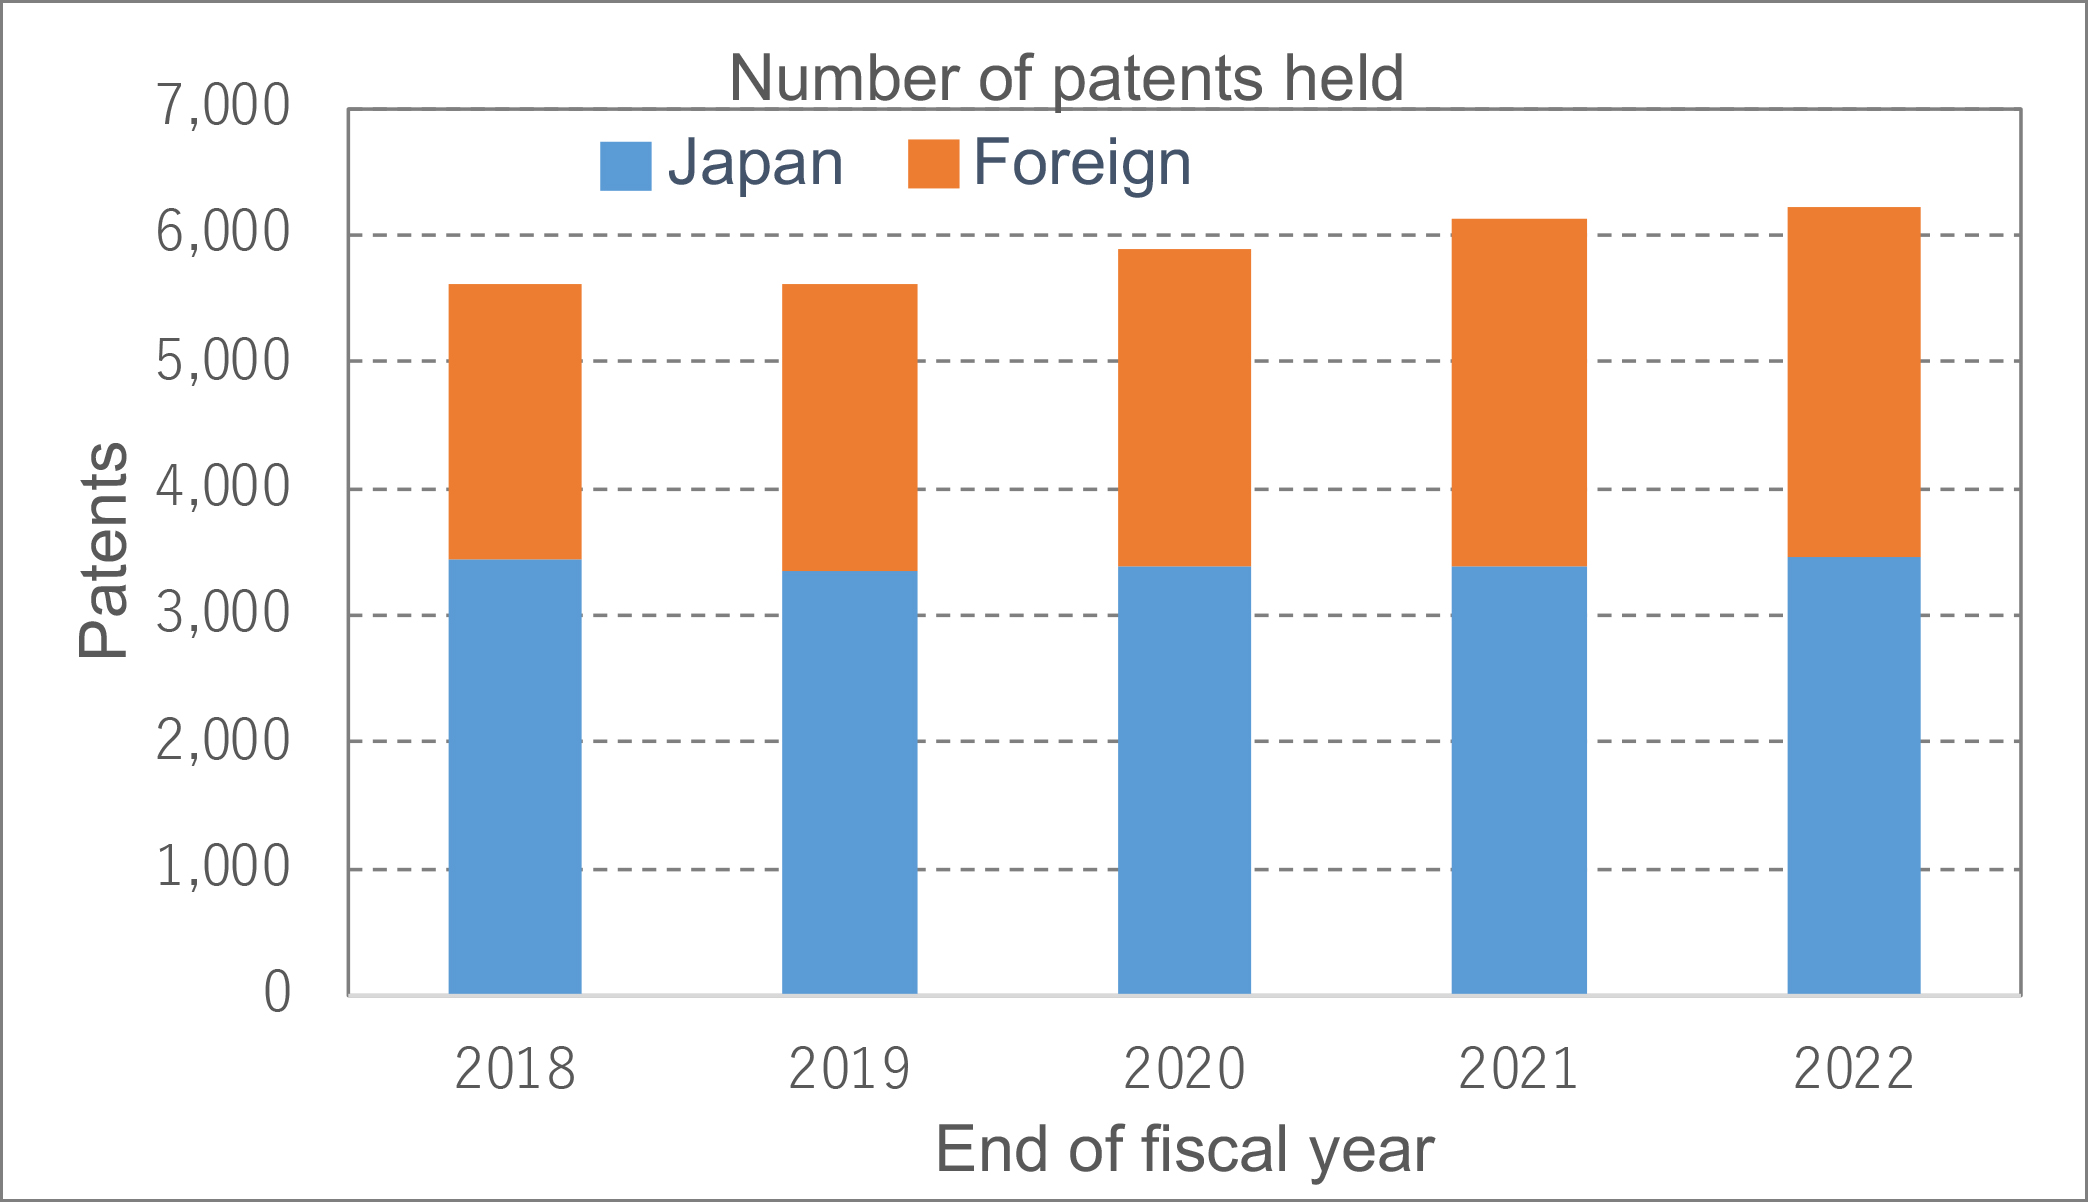 Number of patents held